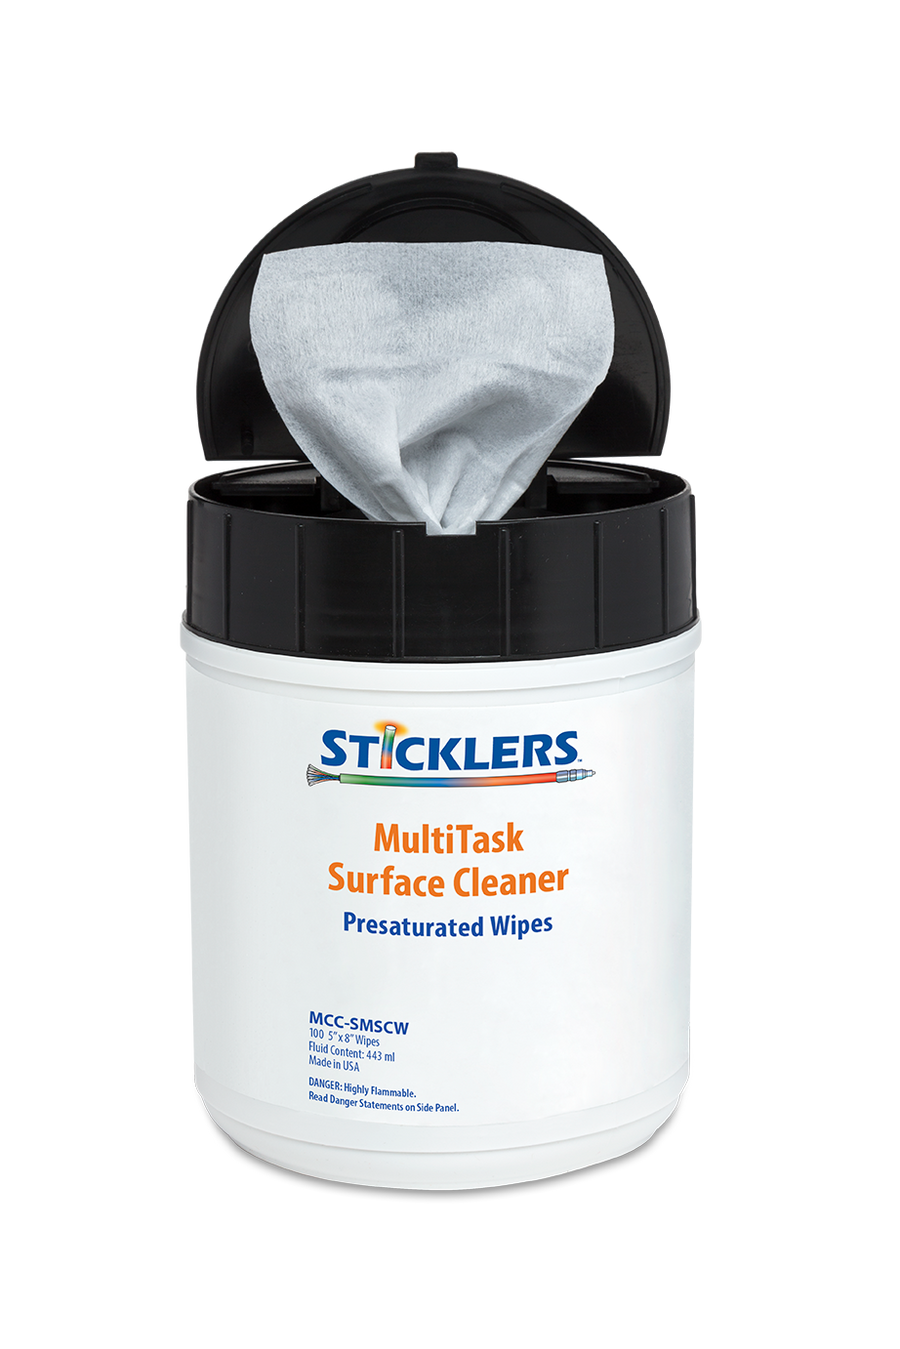 MultiTask Surface Cleaner Presaturated Wipes